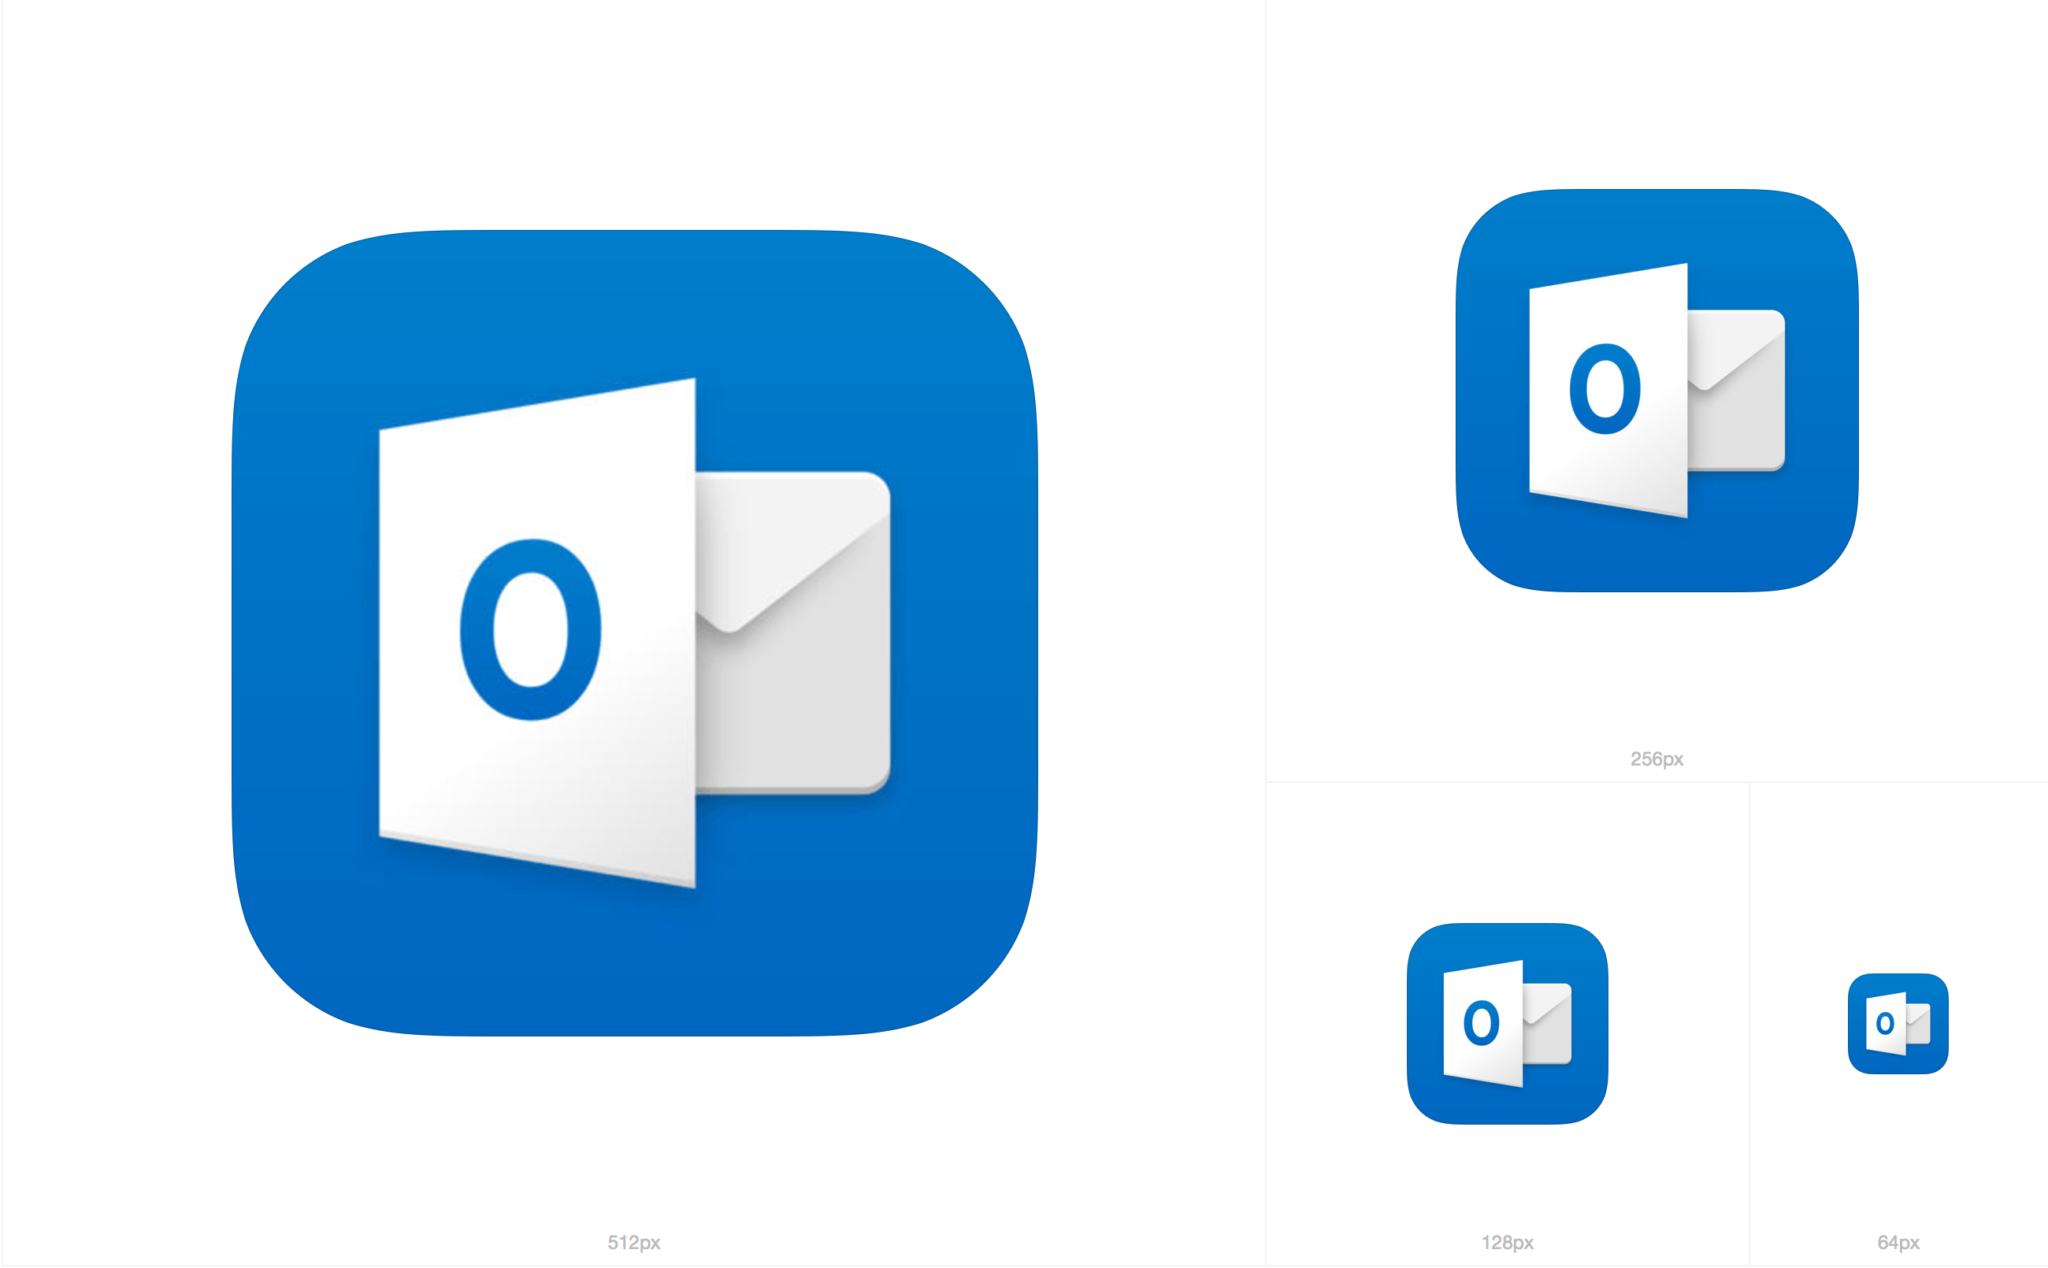 microsoft outlook how to add signature and phone number to email